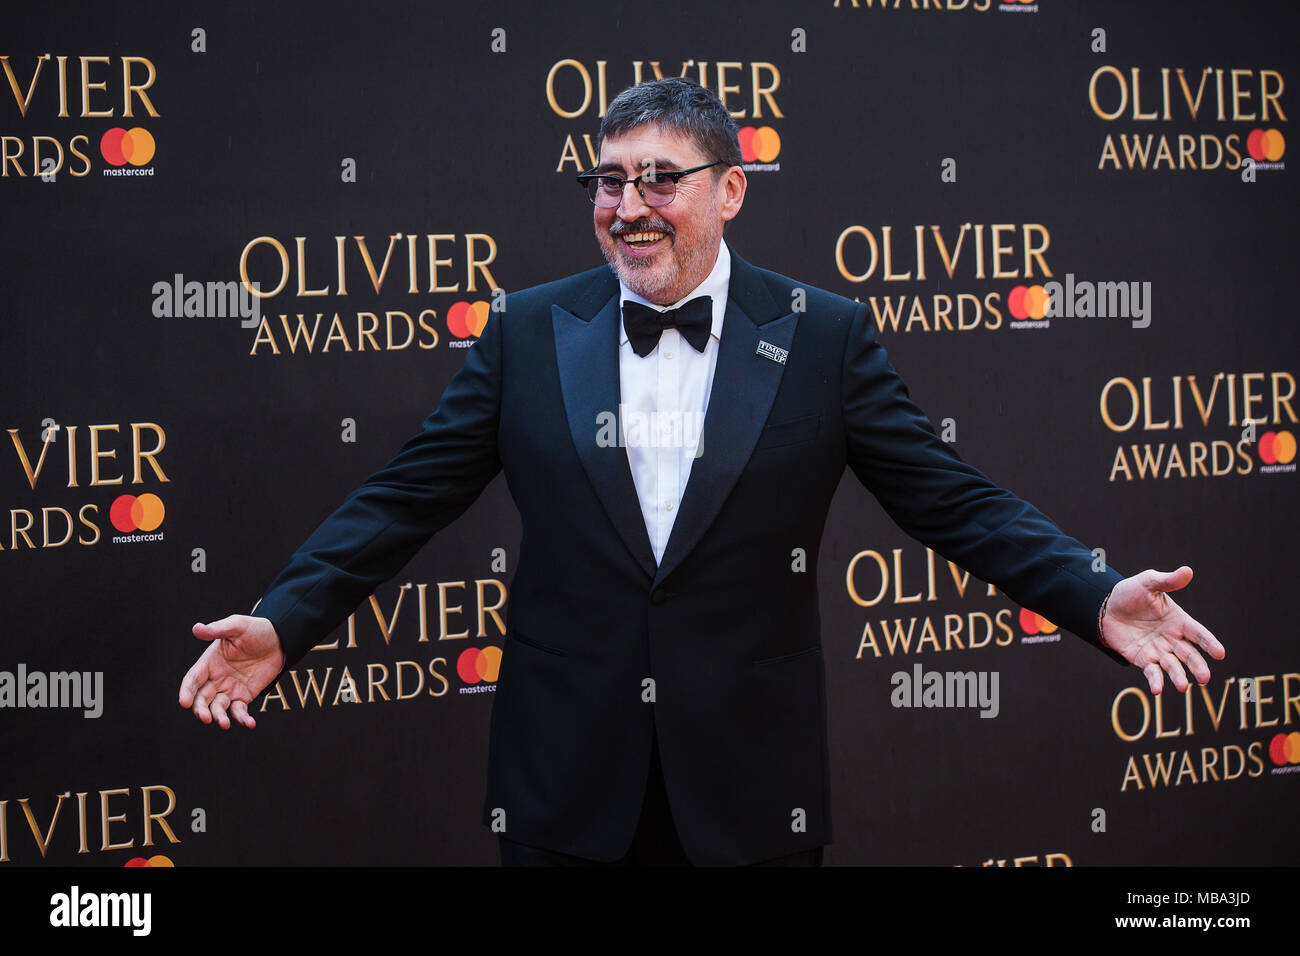 London, UK. 8th April, 2018. British-American actor and voice actor Alfred Molina poses in the rain on the red carpet at the 2018 Olivier Awards held at the Royal Albert Hall. Credit: David Betteridge/Alamy Live News Stock Photo